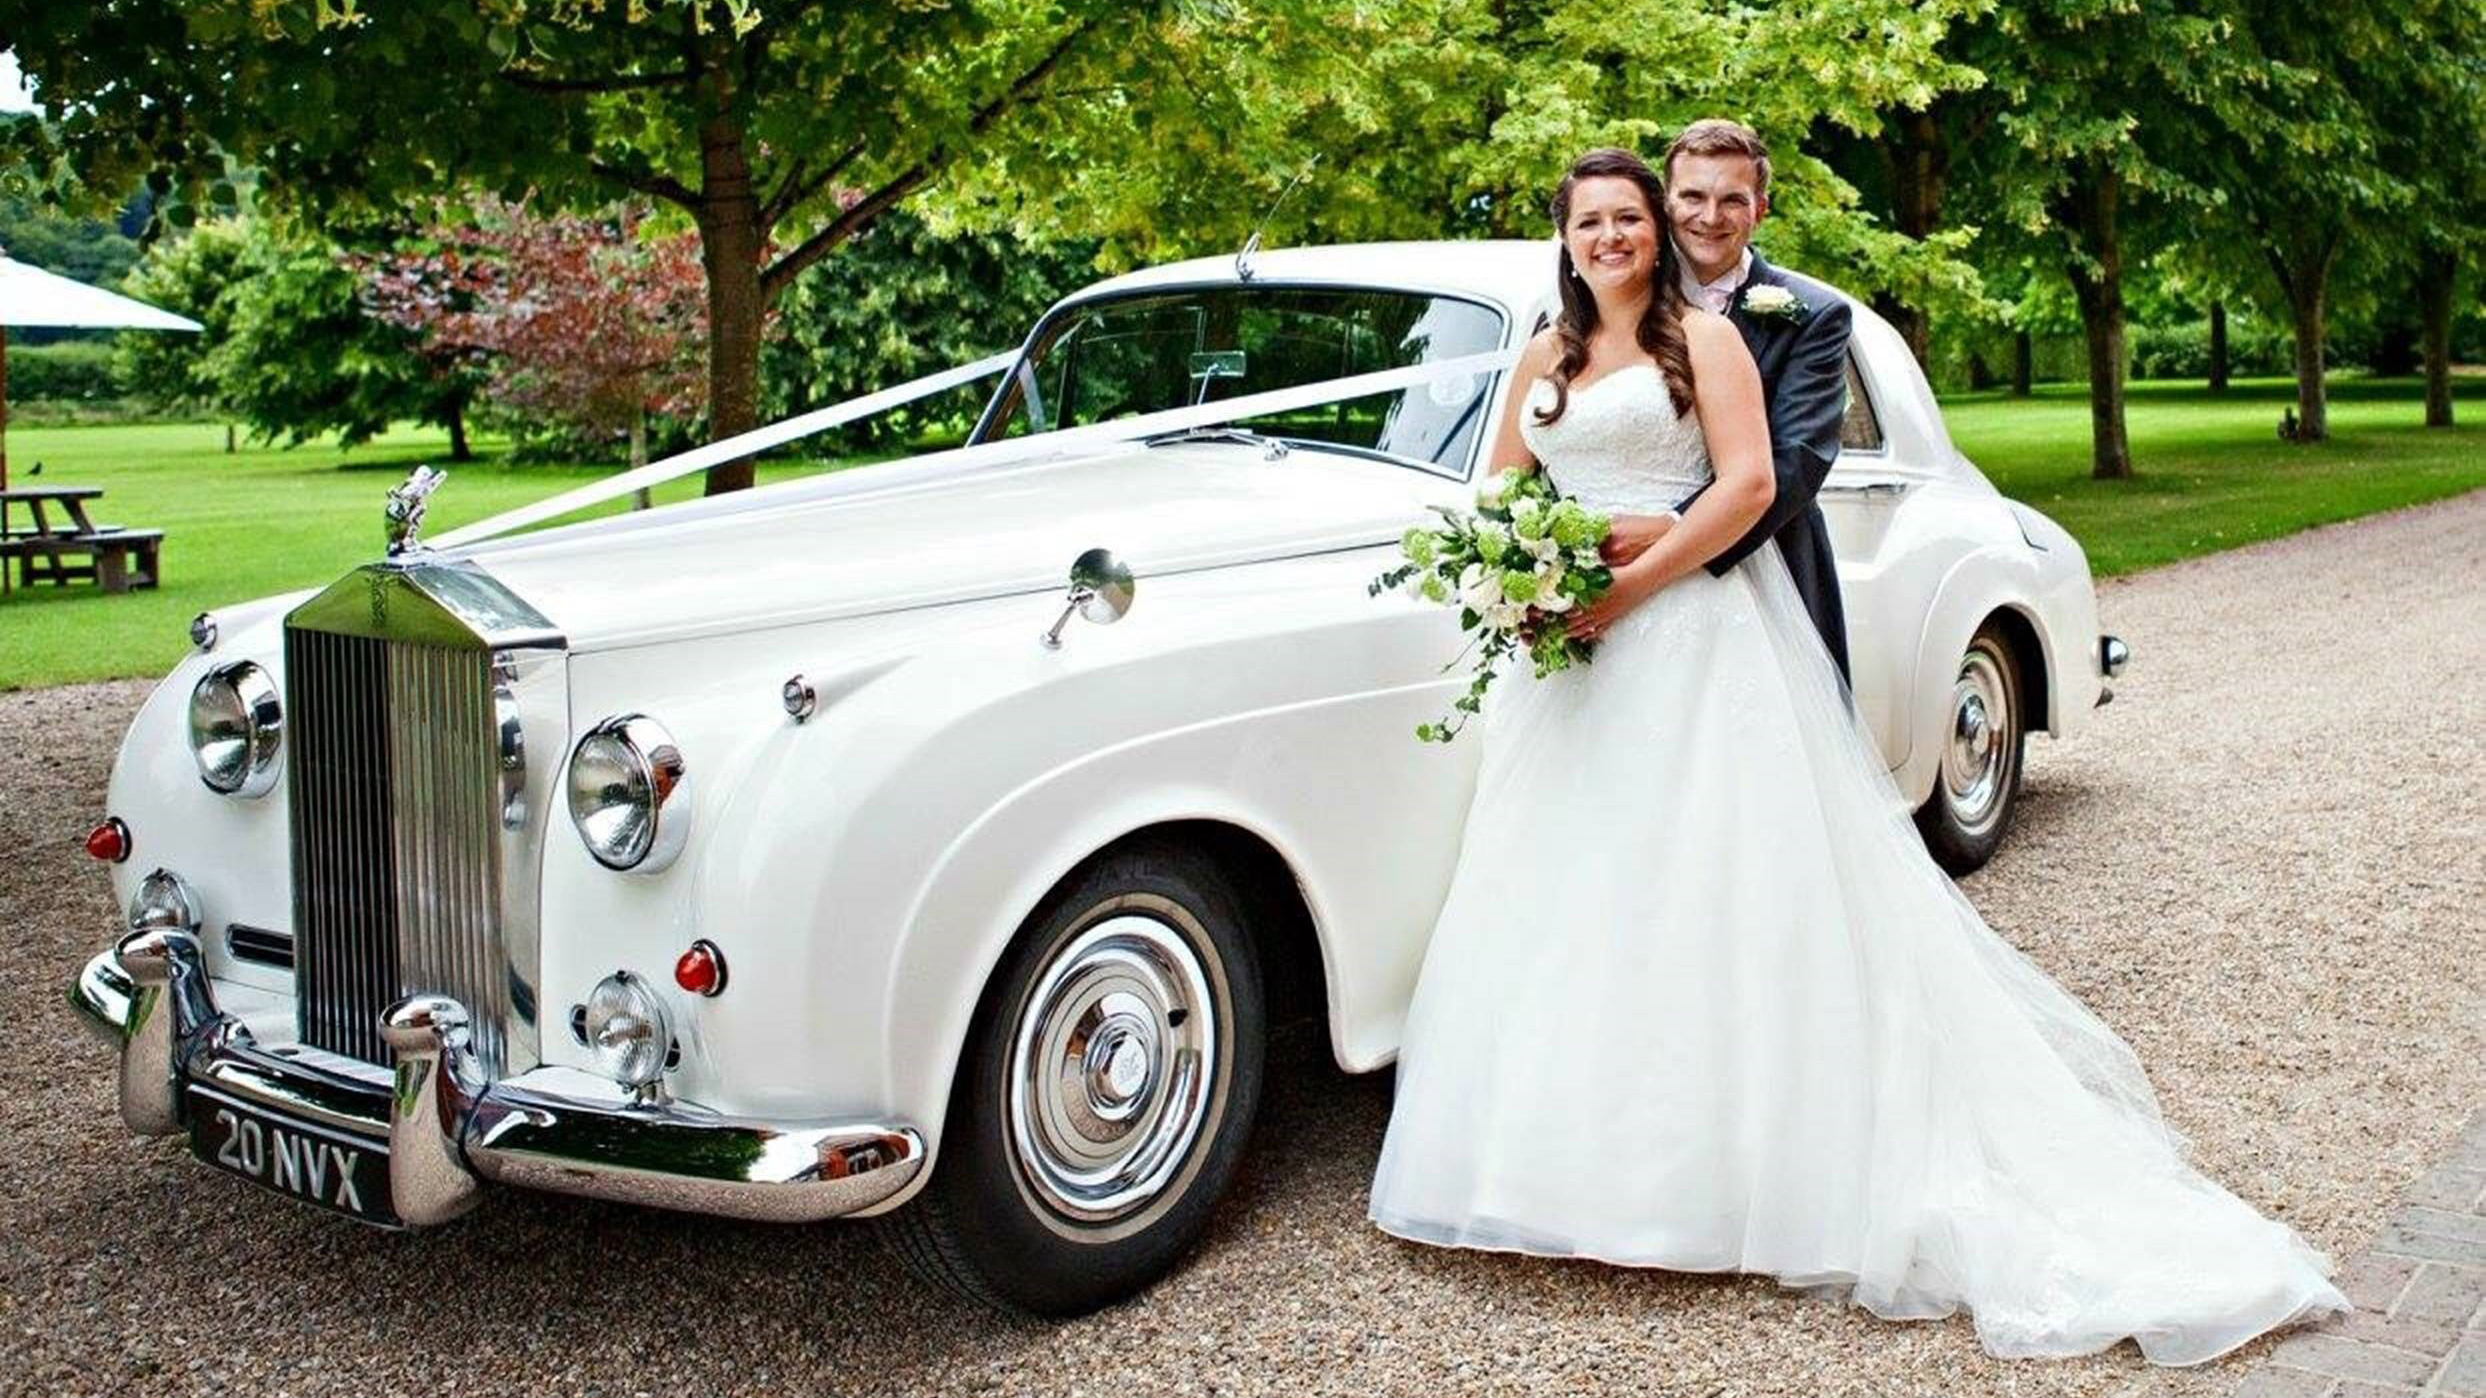 White Rolls-Royce Silver cloud decorated with ivory ribbons parked in the entrance of a wedding venue in Ampthill. Bride and Groom are standing by the vehicle. Groom is holding his Bride in his arms while she holds her bridal bouquet.